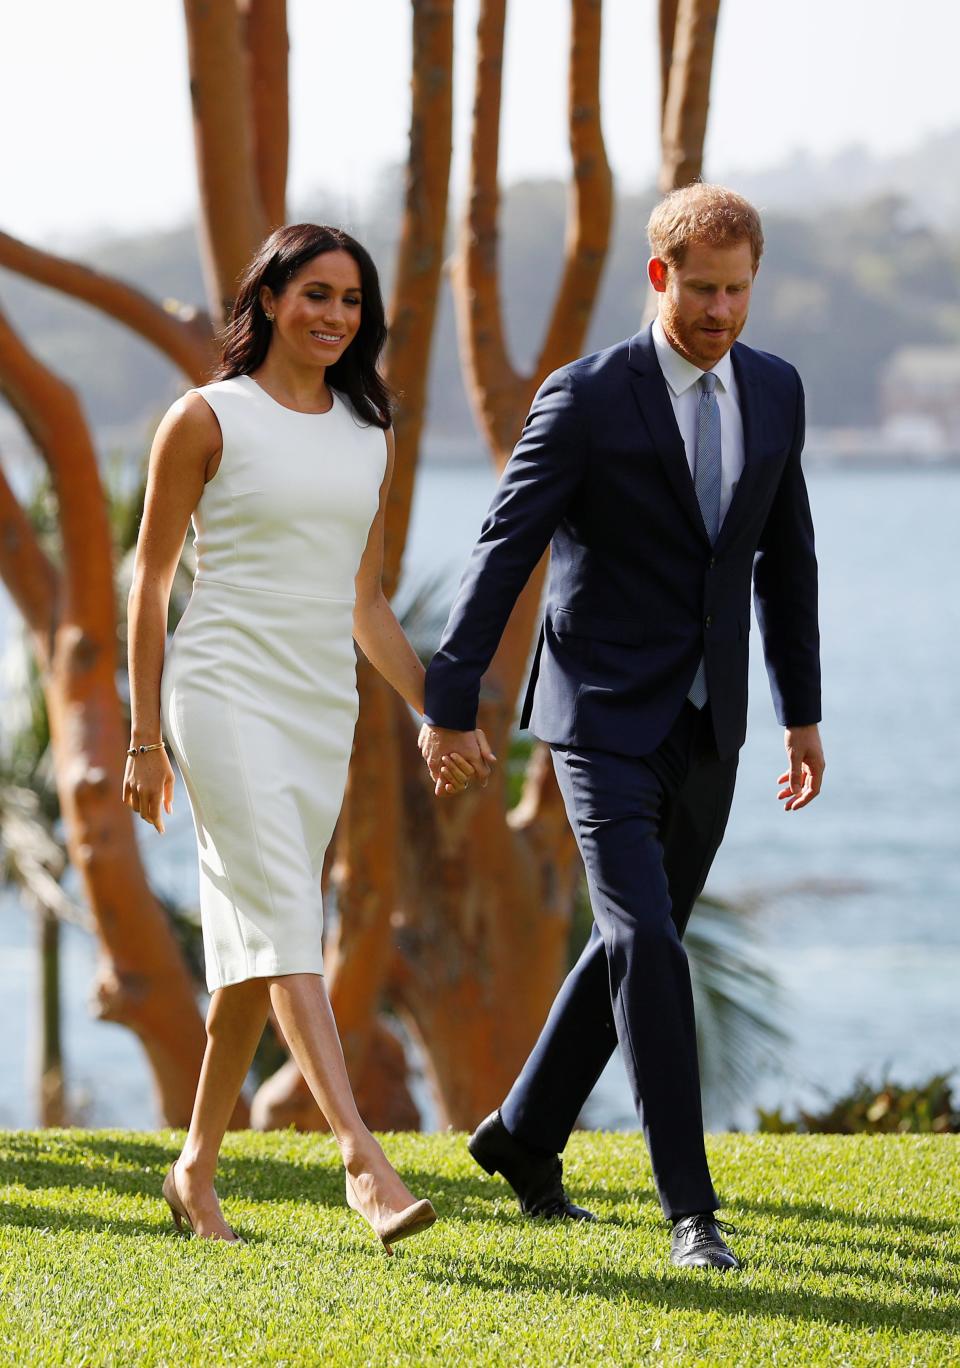 Meghan Markle and Prince Harry attended an official visit in Sydney, Australia, just hours after announcing Meghan's pregnancy.